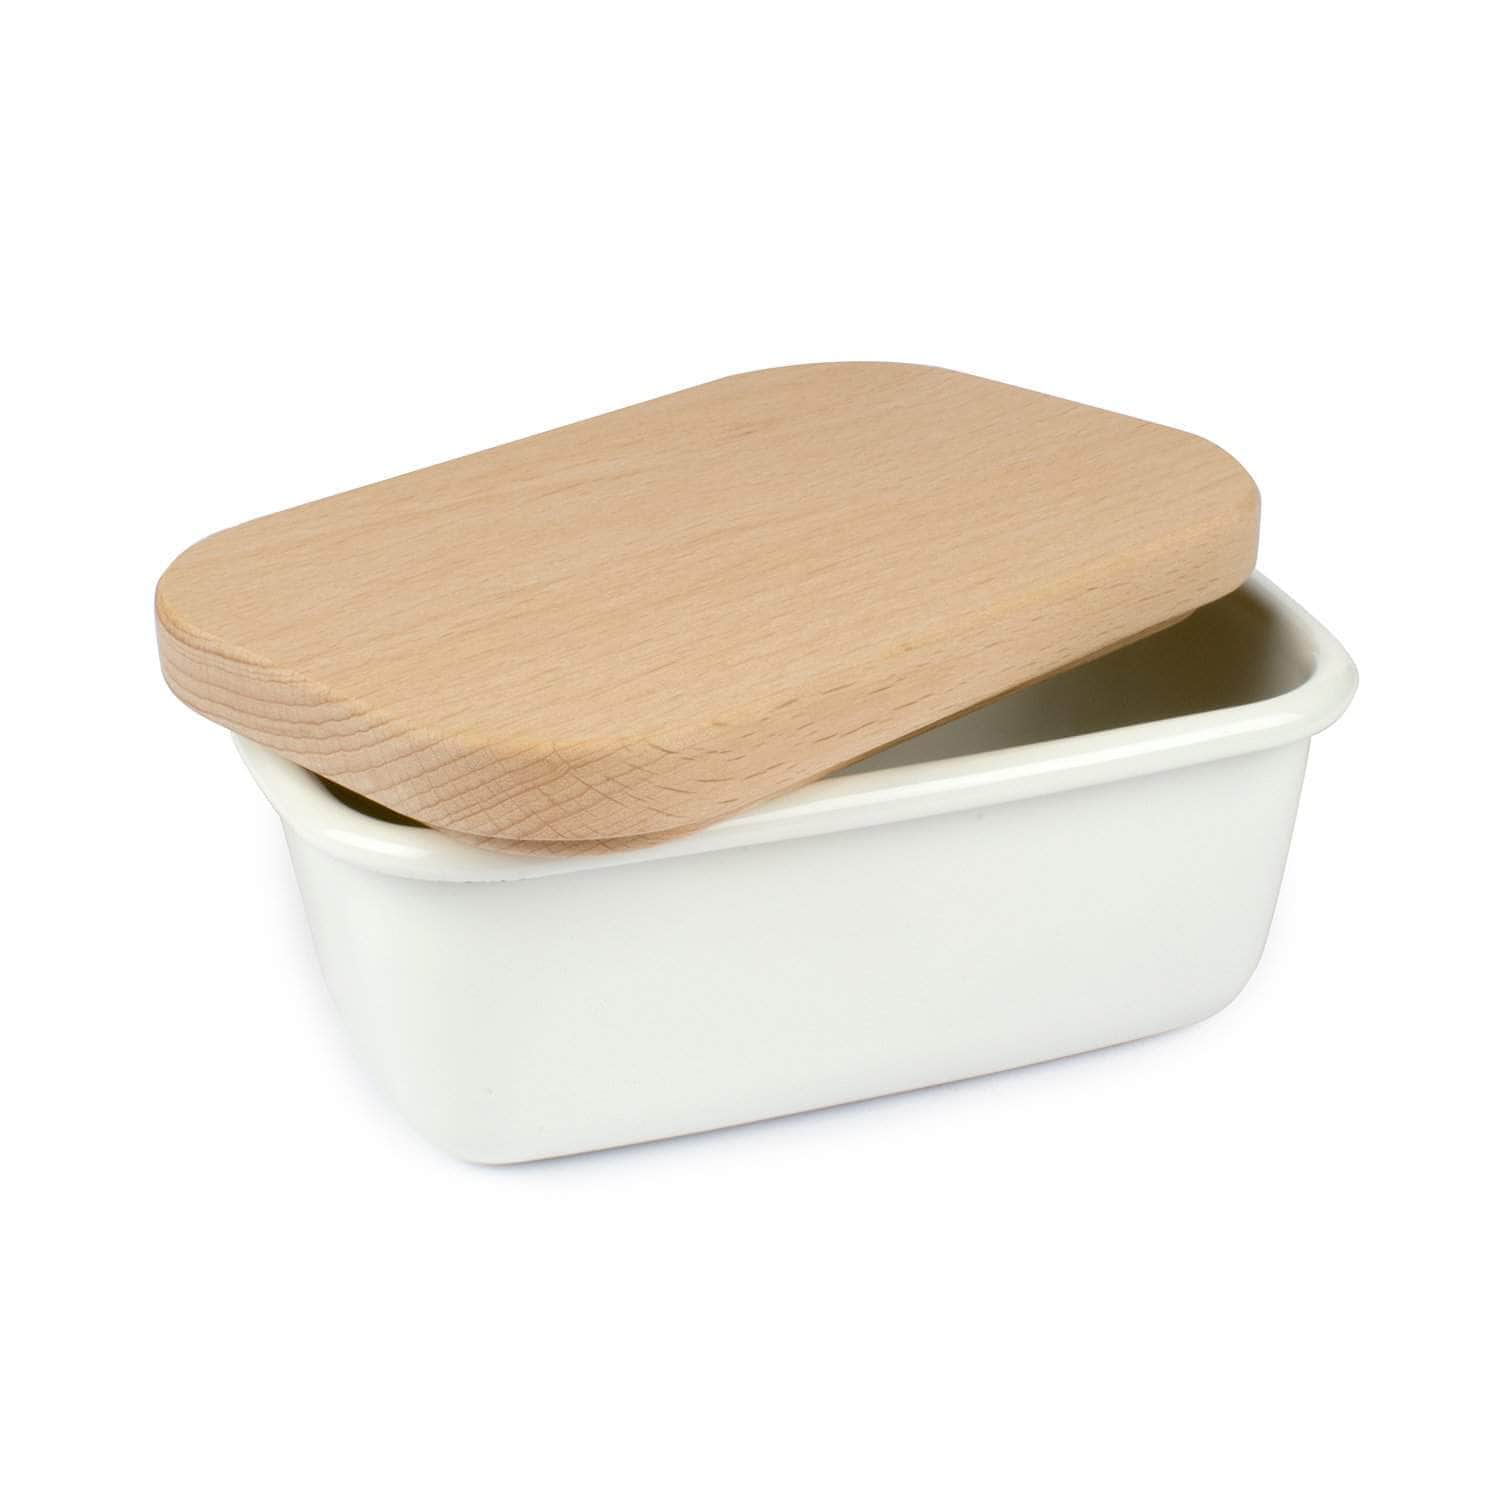 *Not Quite Perfect* Butter dish in vitreous enamel White